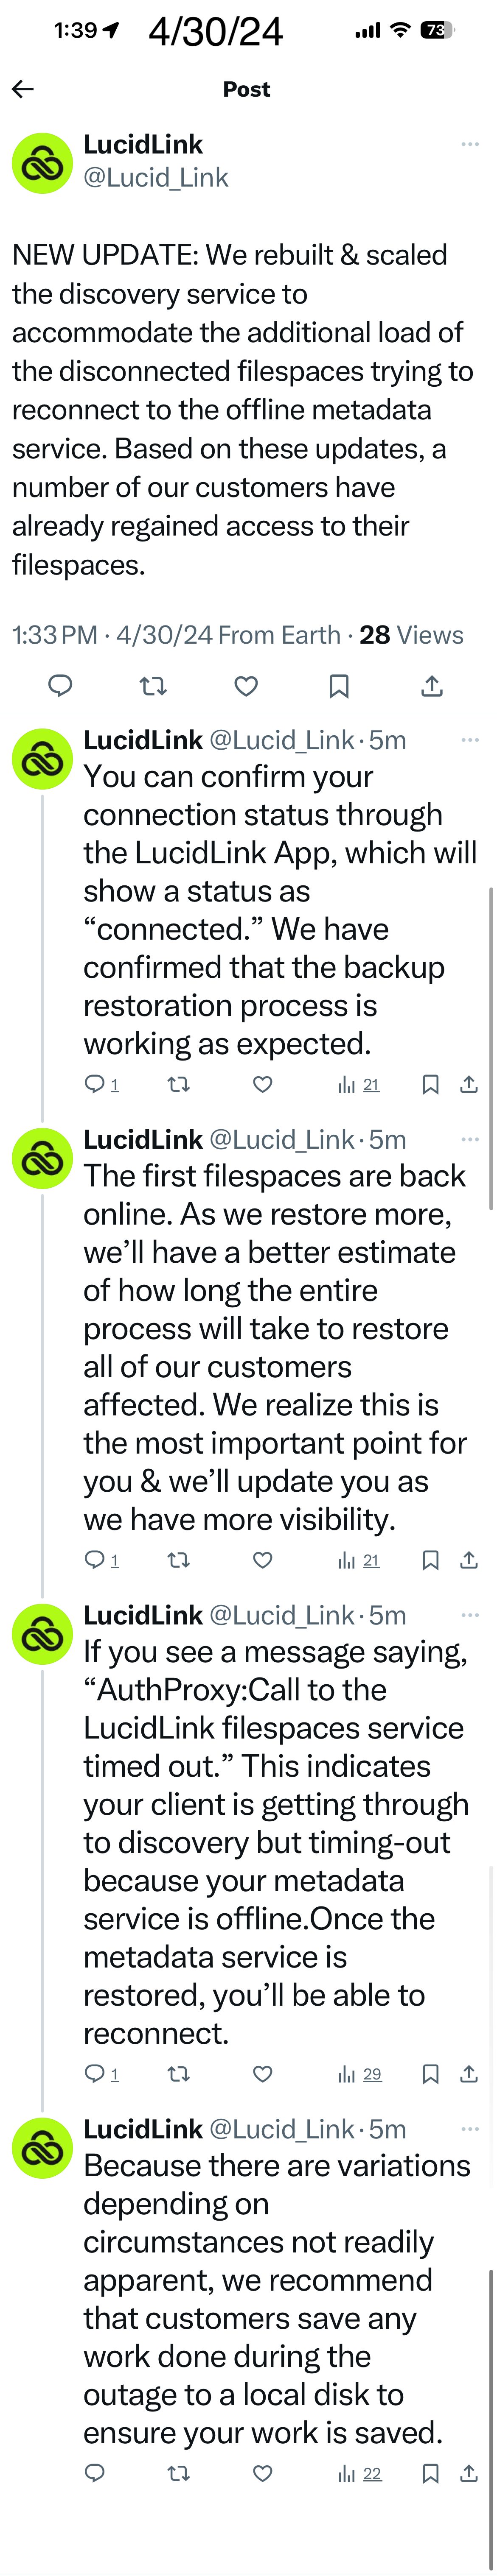 Outage hits LucidLink, updates happening throughout the day, should be coming back online for most users 12